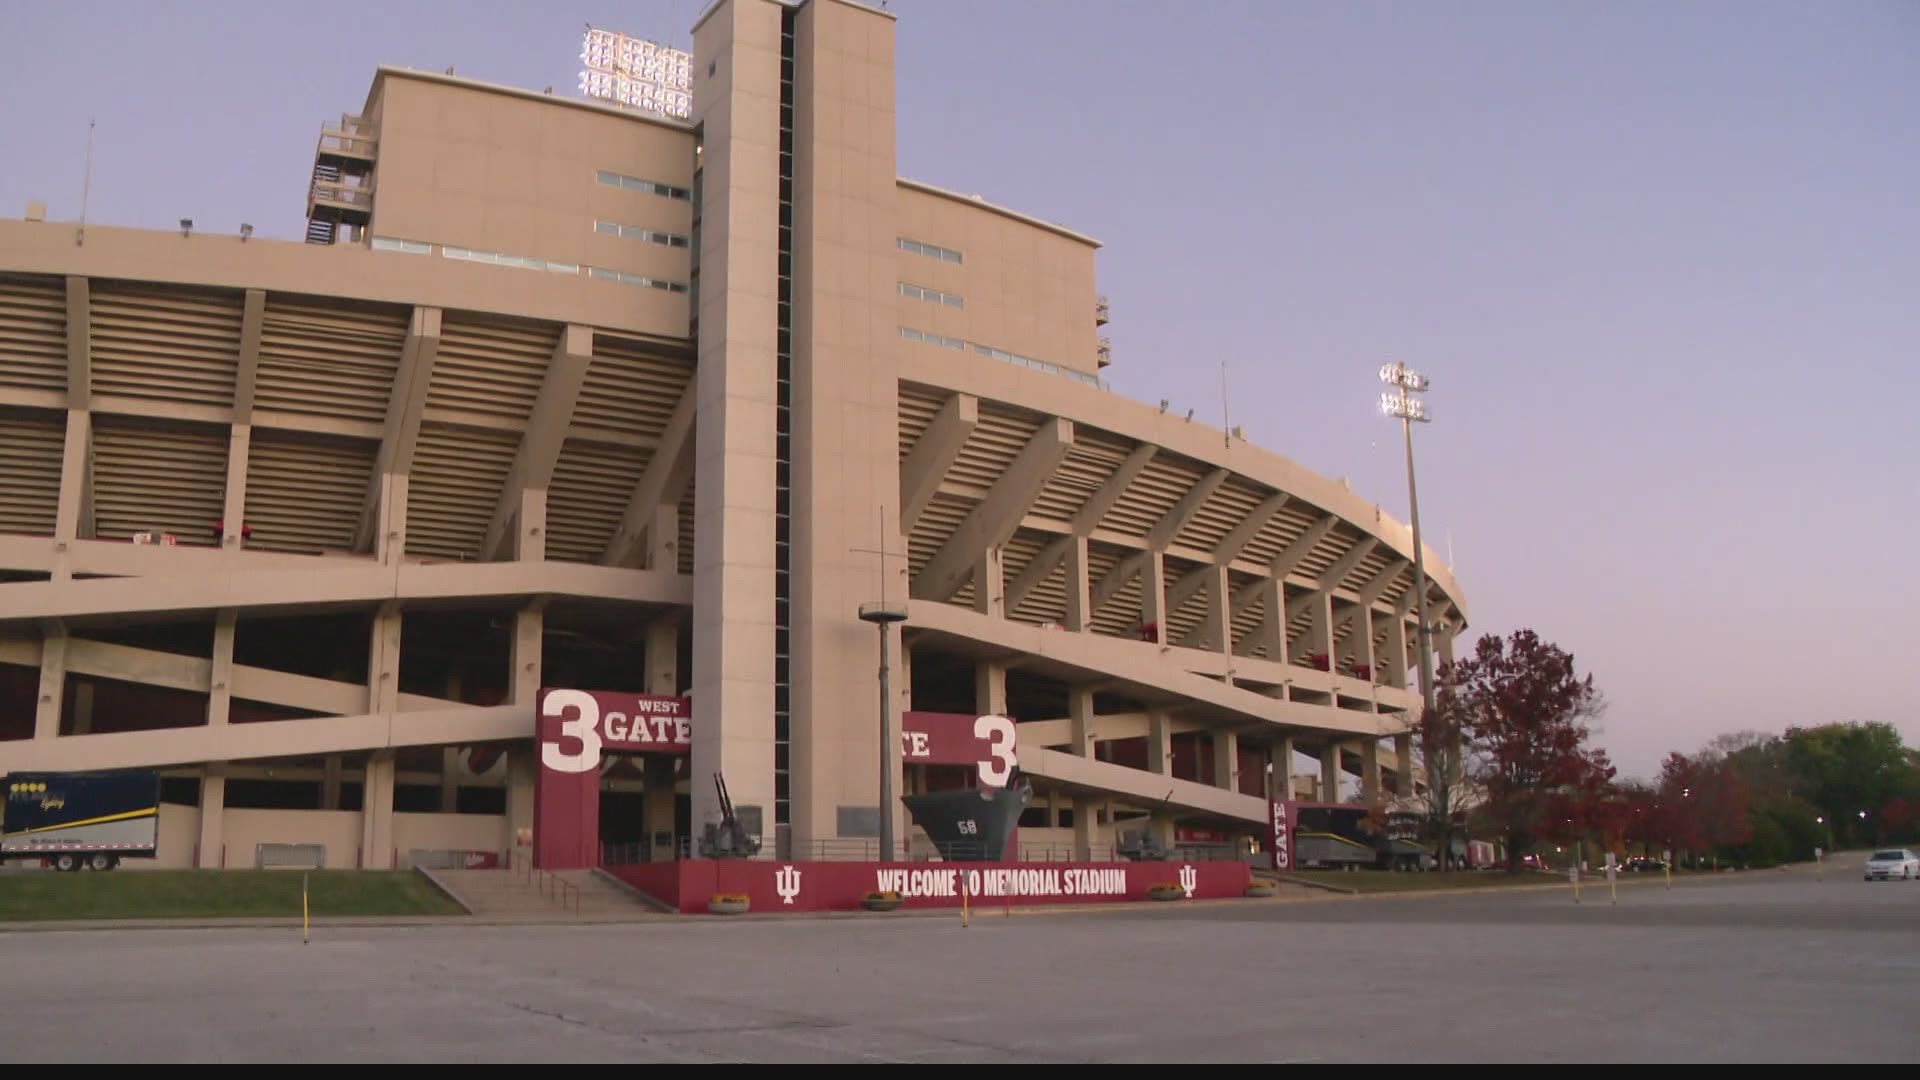 Mayors in 11 Big Ten communities say 'new obstacles' are posed with the resumption of football games.